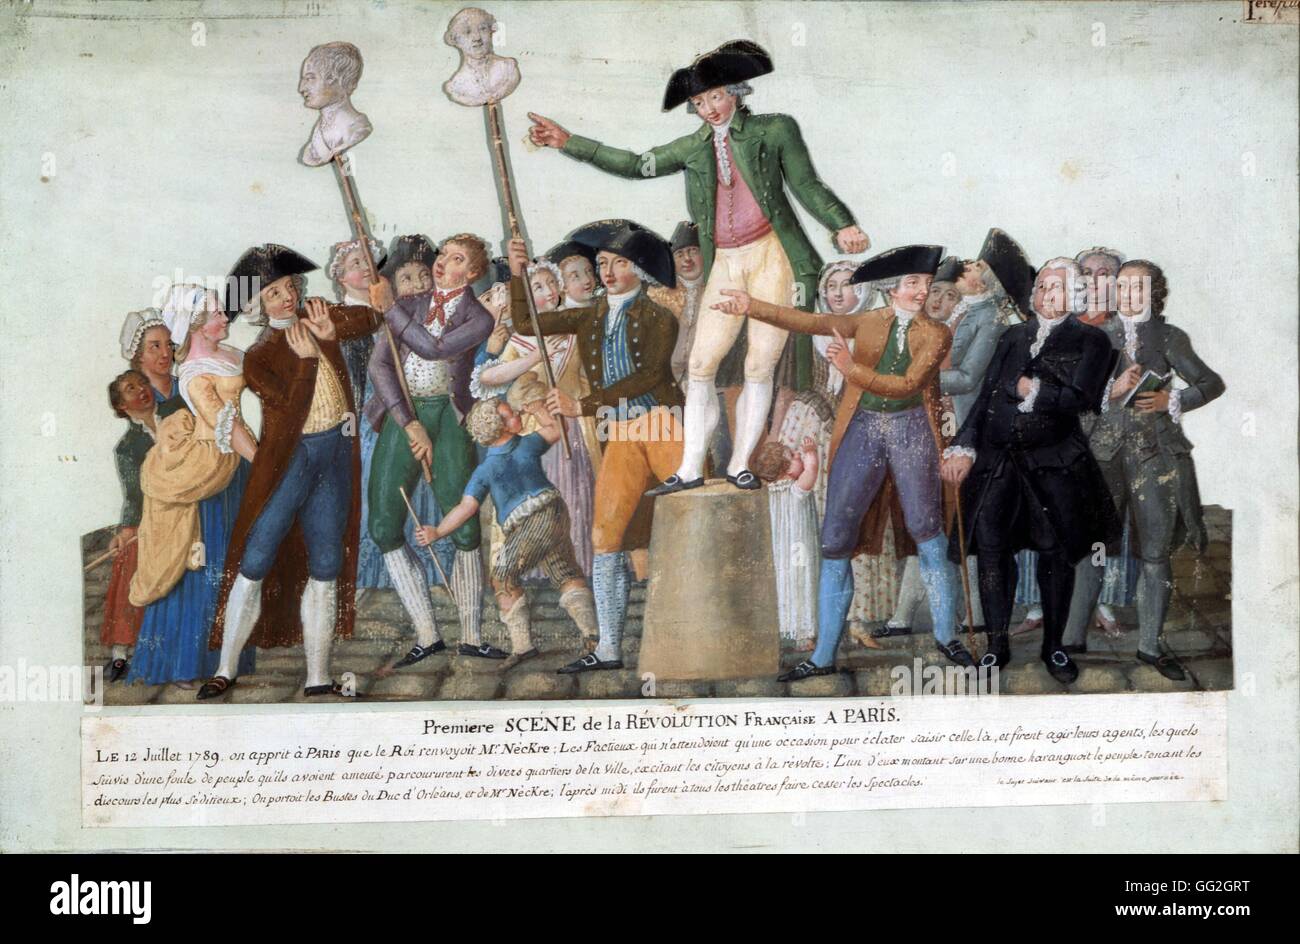 Jean-Baptiste Lesueur French school First uprising of the French Revolution in Paris caused by the discharge of Minister Necker. 12 July 1789. The busts of Necker and the Duke of Orleans are being paraded on spikes. c.1789 Gouache on cardboard (36 x 53.5 Stock Photo